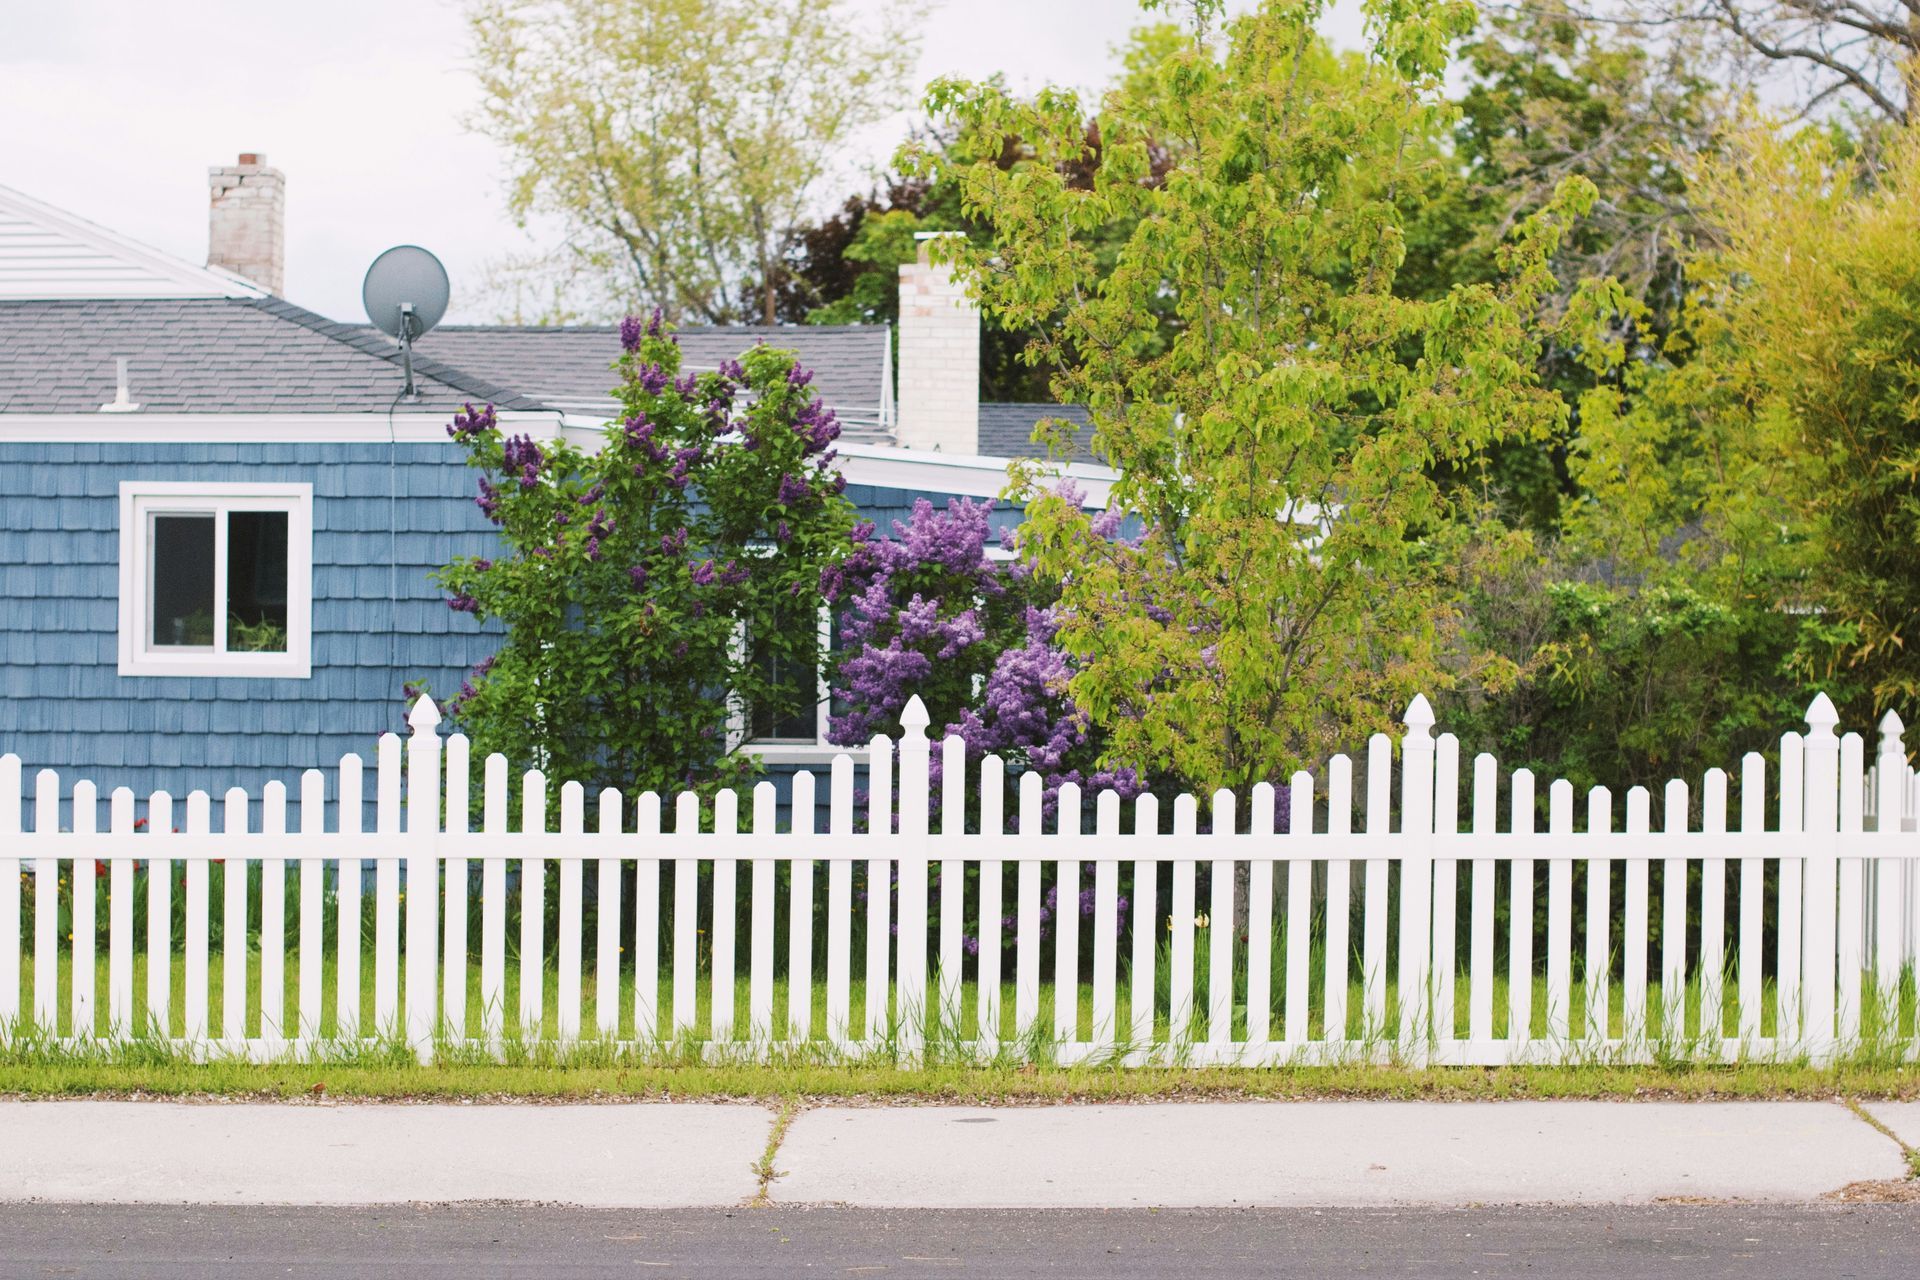 A white picket fence bordering the property of a blue house